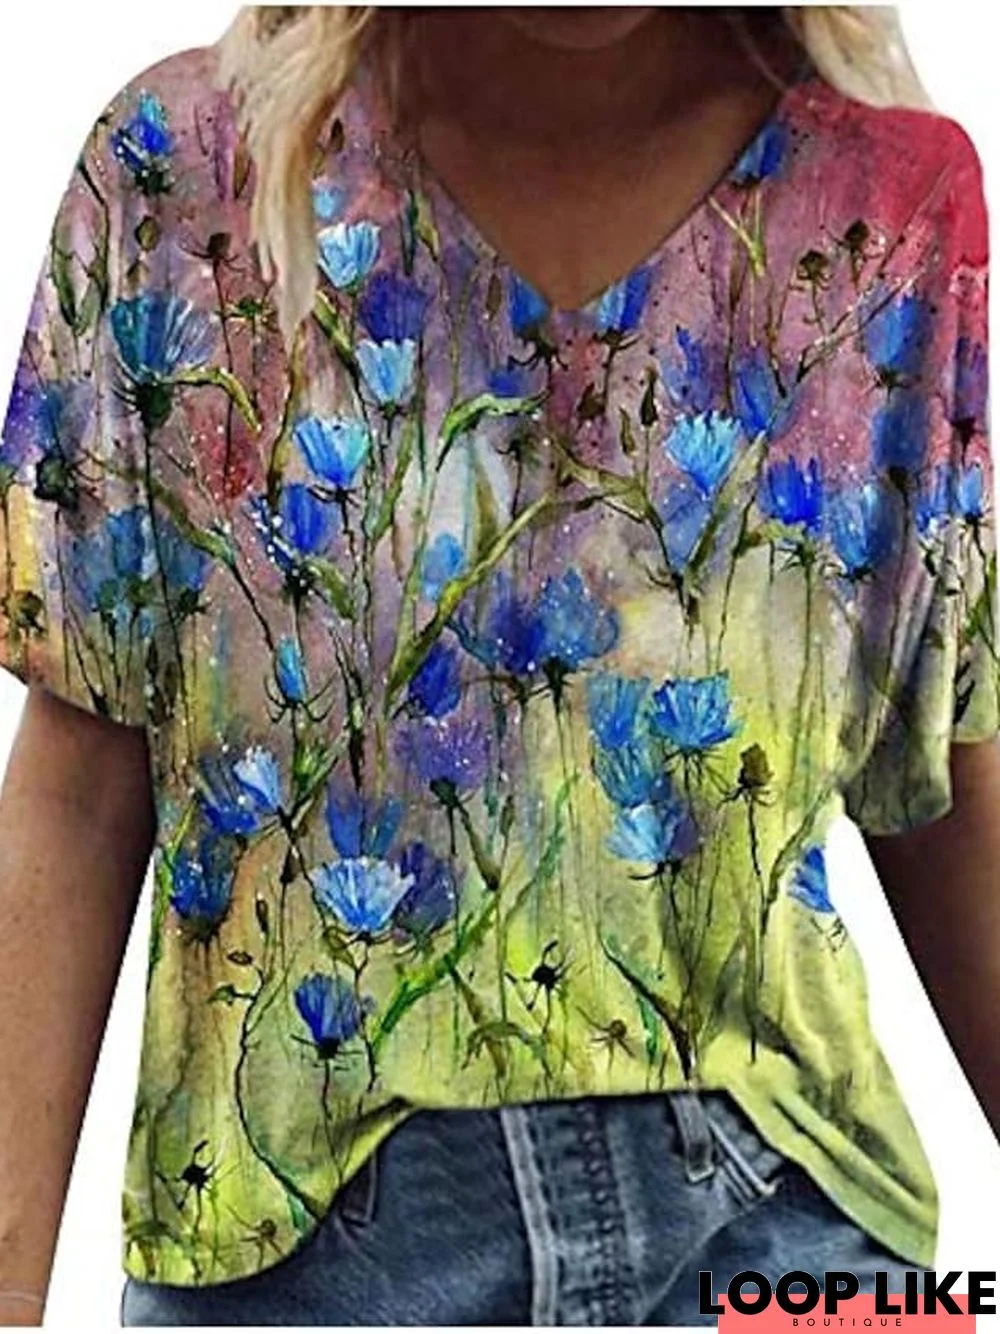 poto womens short sleeve shirts, casual tops for women vintage floral graphic t-shirt v-neck tees summer tunics blouses